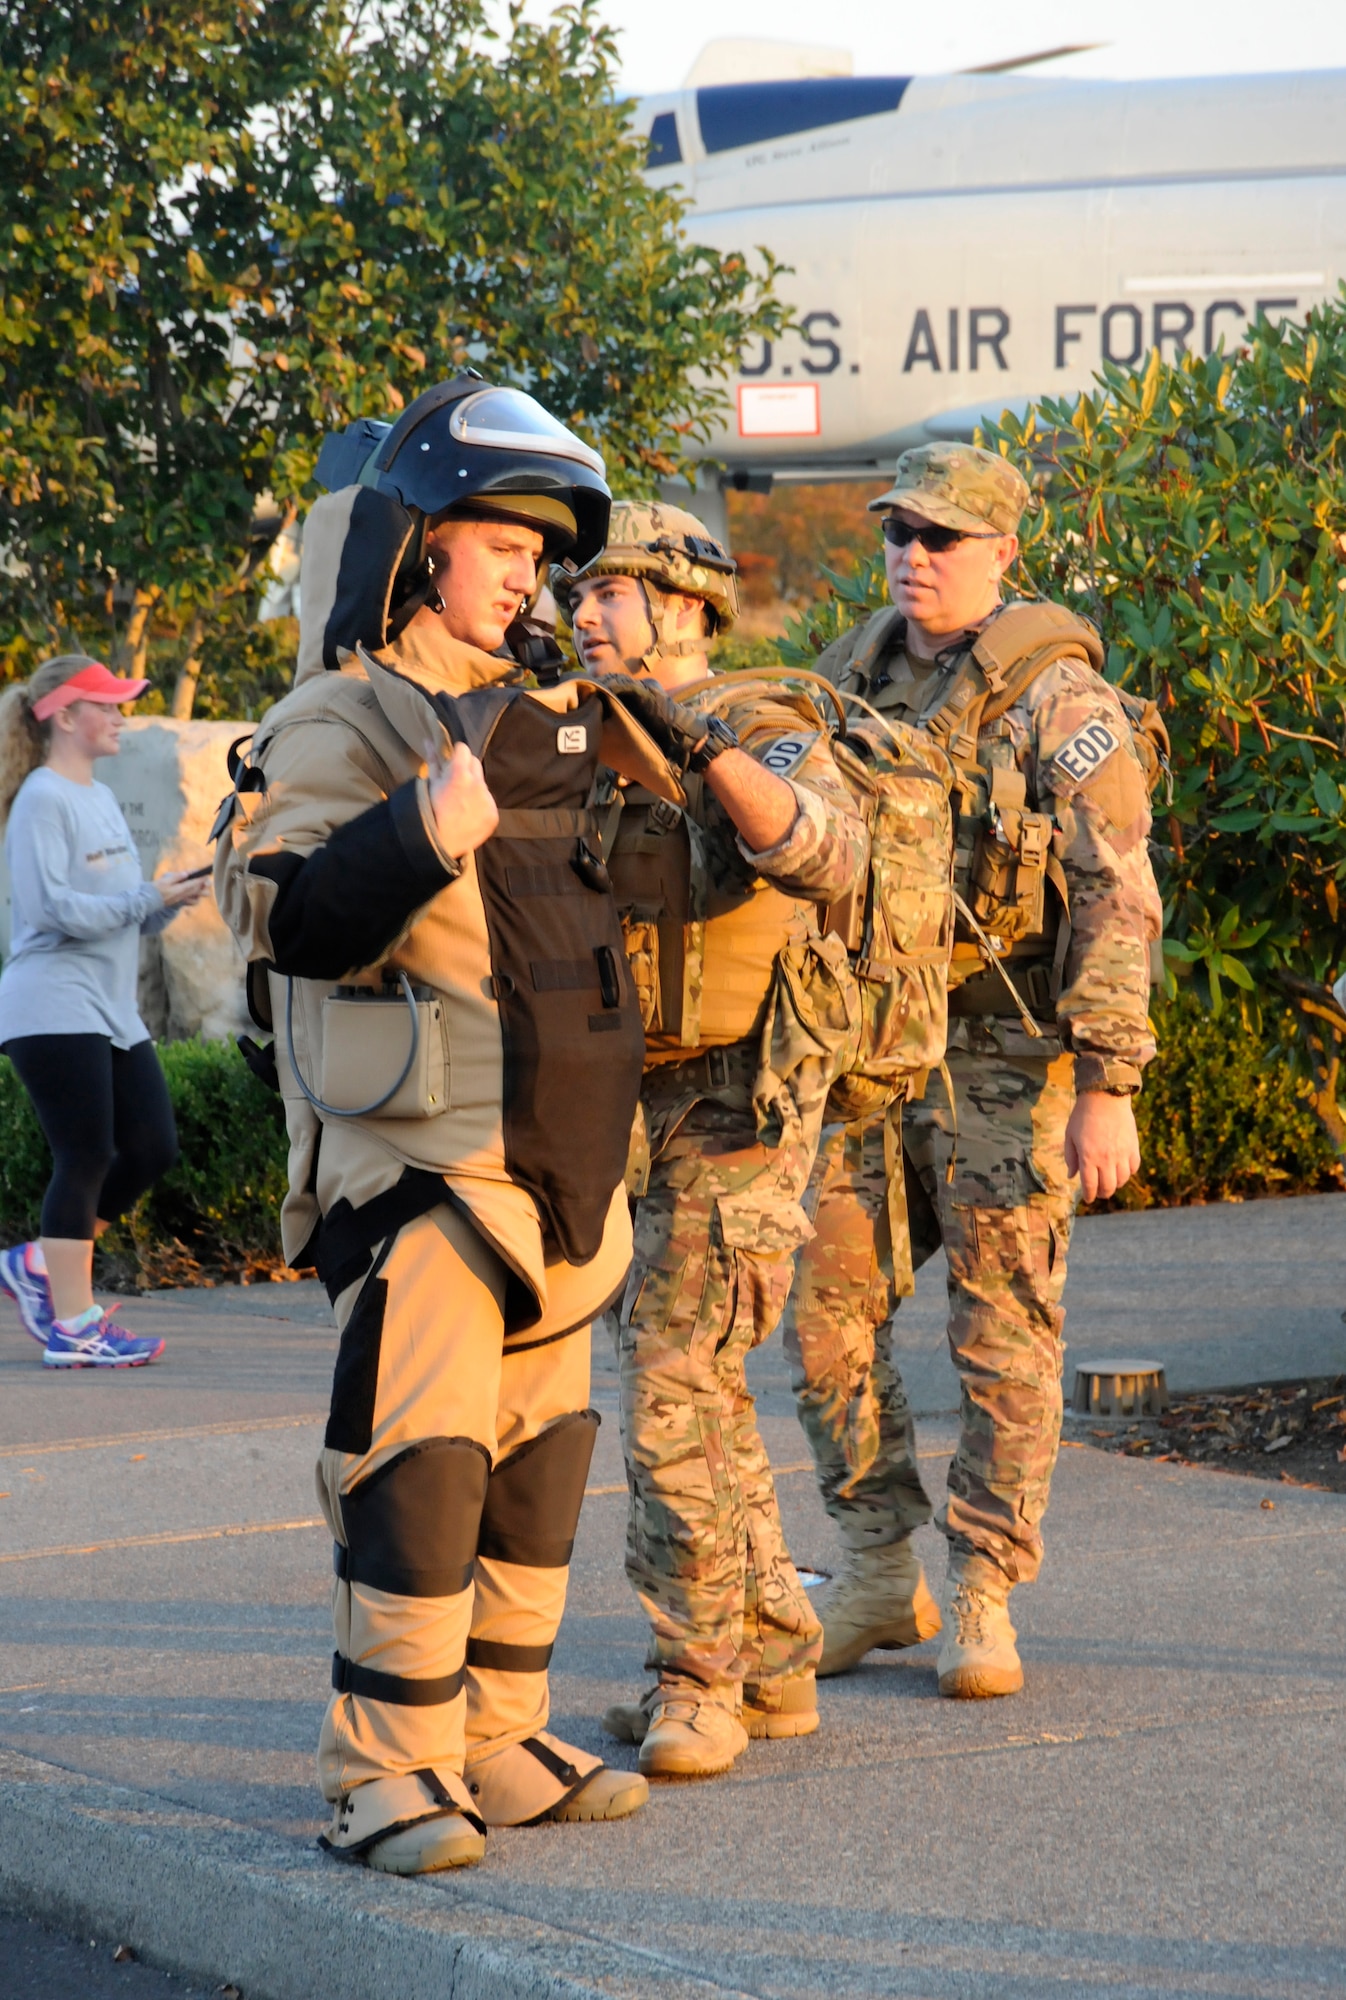 Oregon Airman 1st Class Alec Camp, an Explosive Ordinance Disposal (EOD) technician, left, has assistance from other EOD members from the 142nd Fighter Wing Civil Engineer Squadron following the ‘Ruck, Run and Walk’, at the Portland Air National Guard Base, Ore., Sept. 11, 2015. (U.S. Air National Guard photo by Tech. Sgt. John Hughel, 142nd Fighter Wing Public Affair/Released)